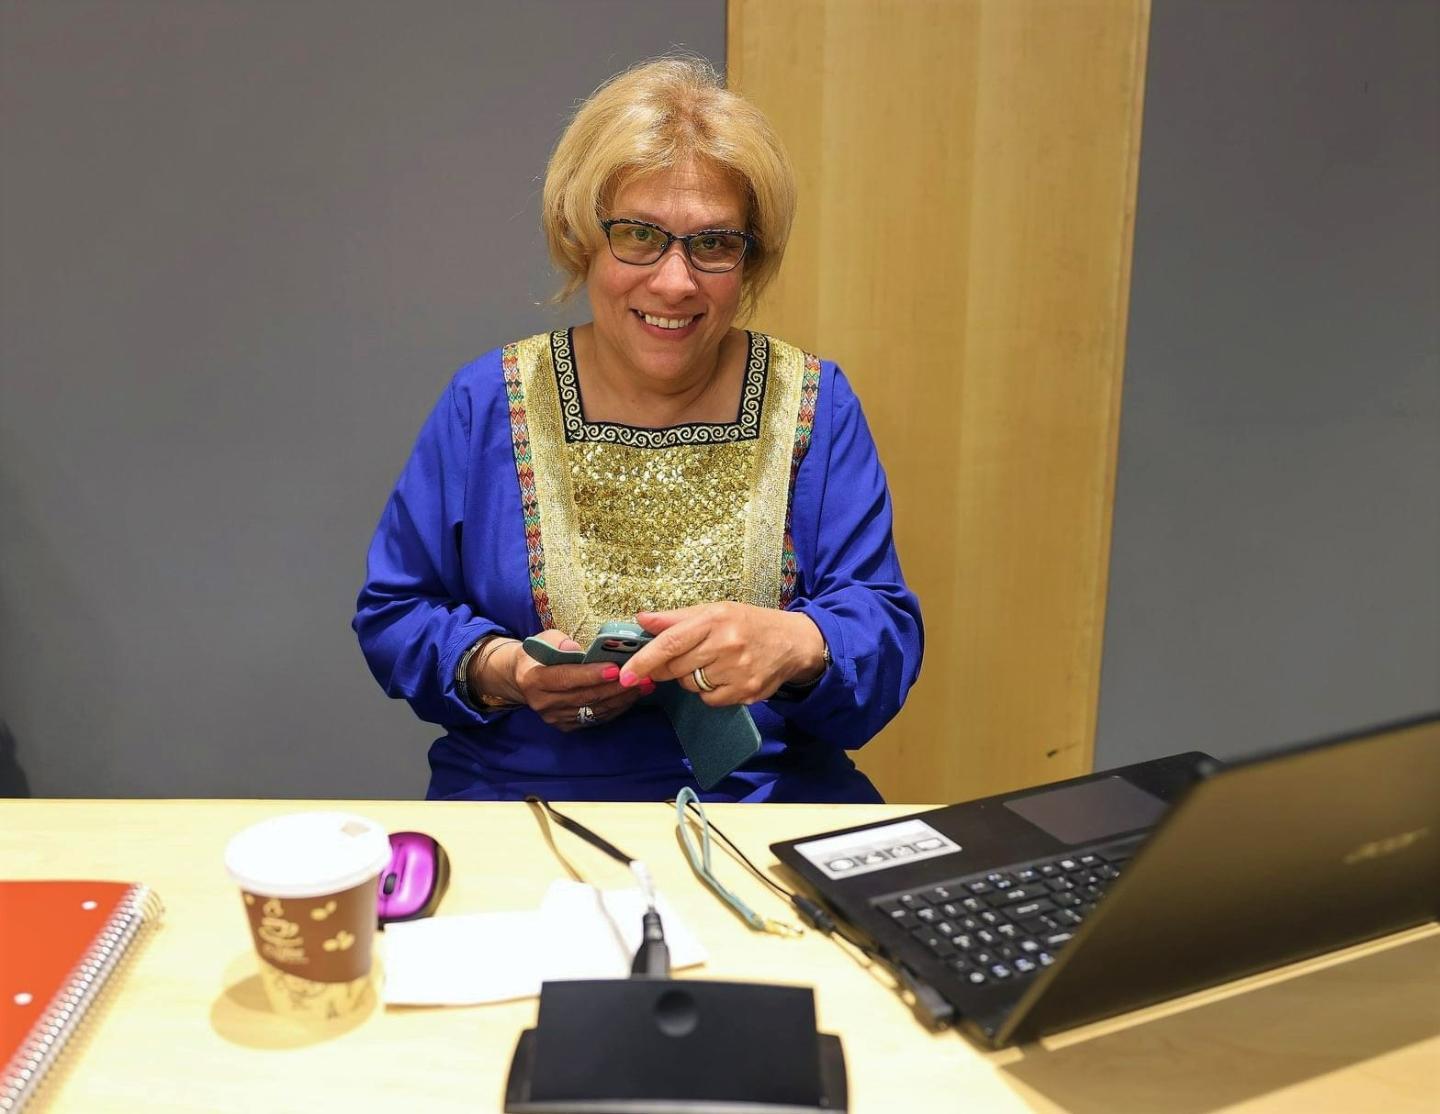 Image of Carmen Feliciano sitting at a desk with laptop for signing in students from the Black Male Initiative at SUNY Global.